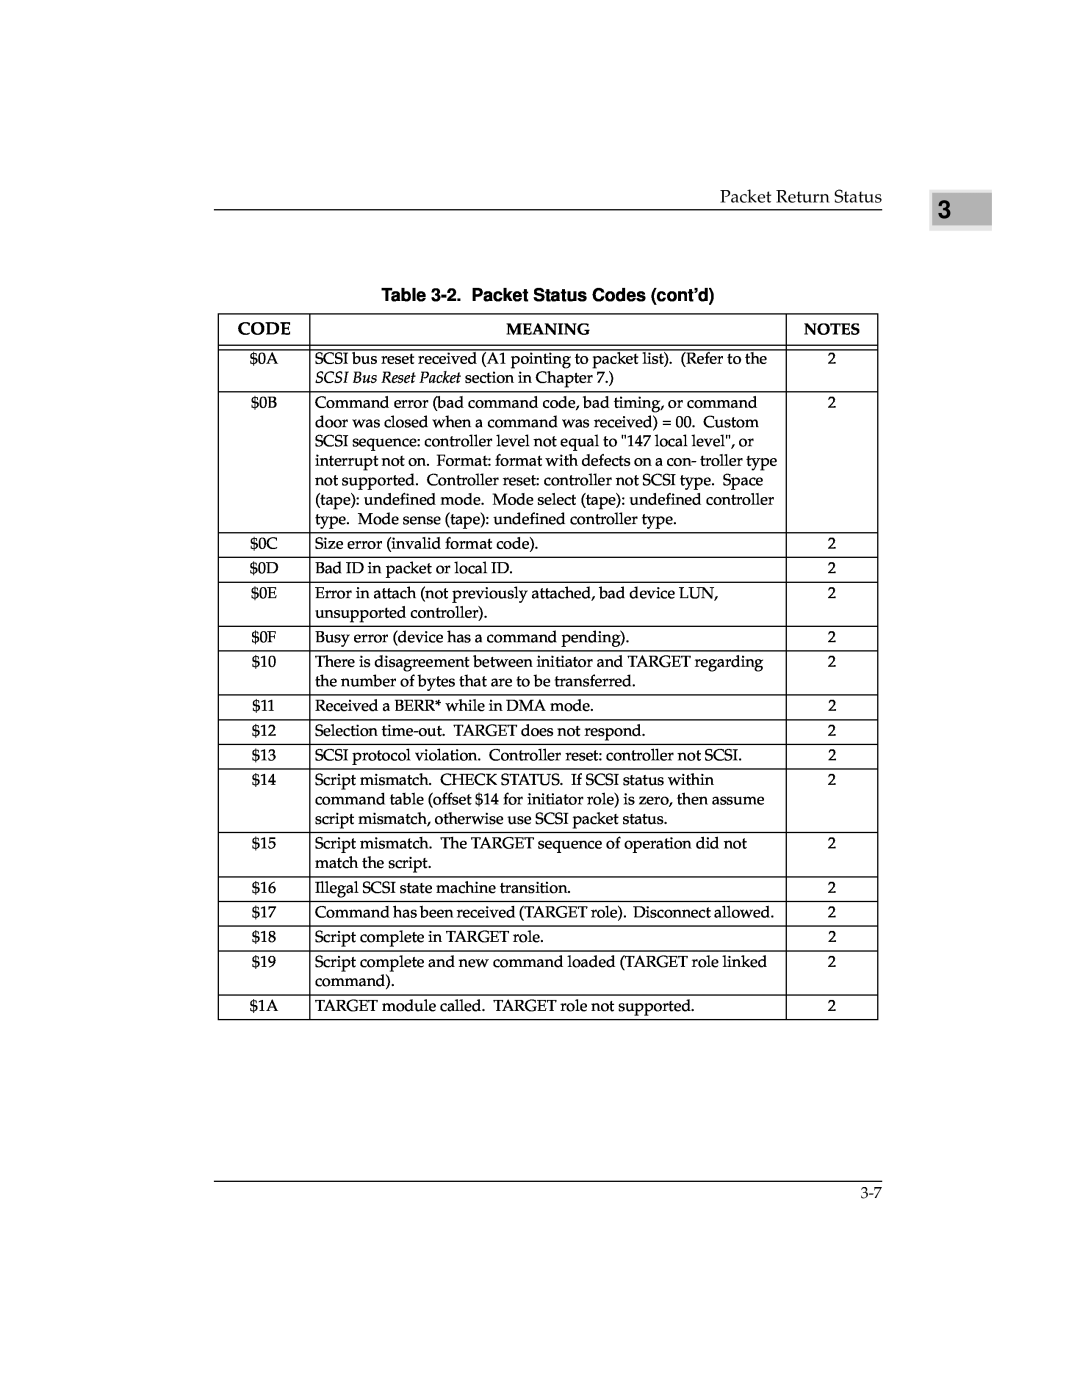 Emerson MVME147 manual 2.Packet Status Codes cont’d, Meaning, Notes, SCSI Bus Reset Packet section in Chapter 